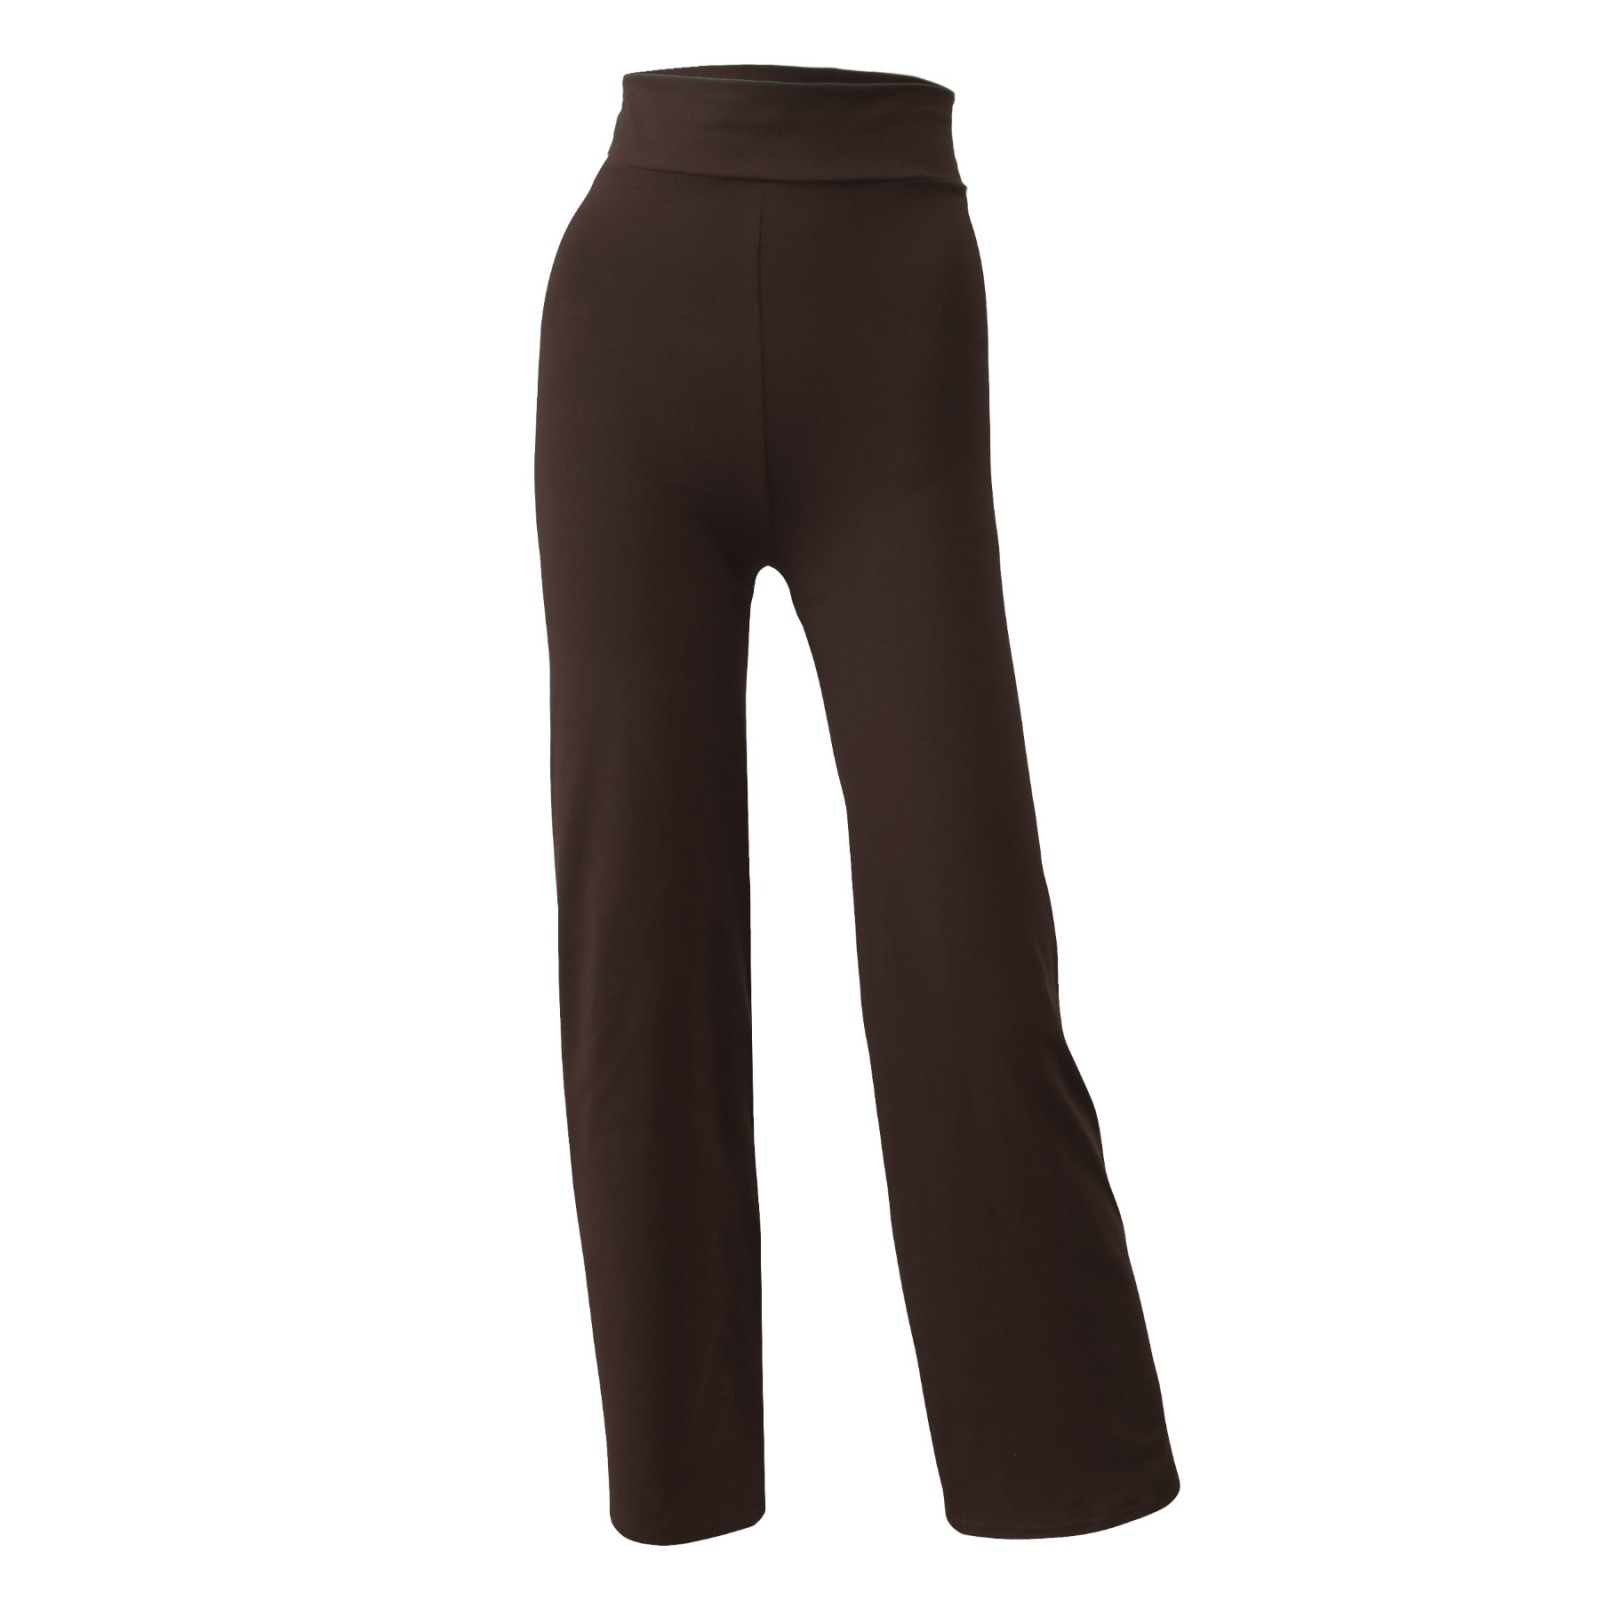 Yoga pants Relaxed Fit brown